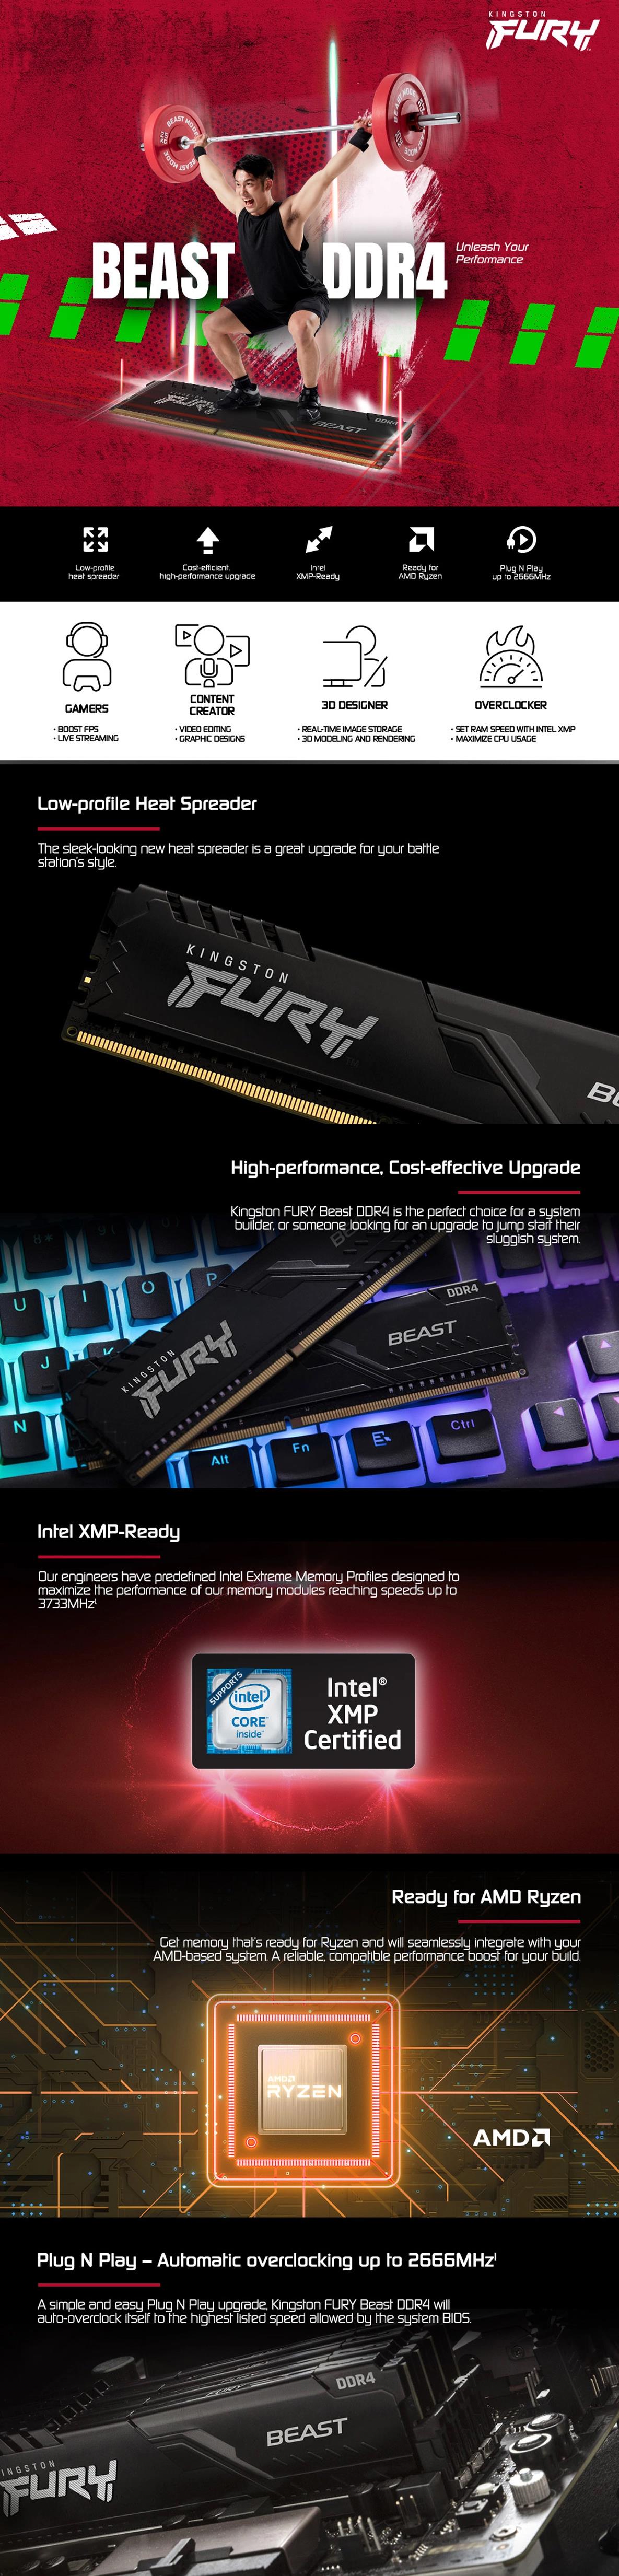 A large marketing image providing additional information about the product Kingston 64GB Kit (2x32GB) DDR4 Fury Beast C16 3200MHz - Black - Additional alt info not provided